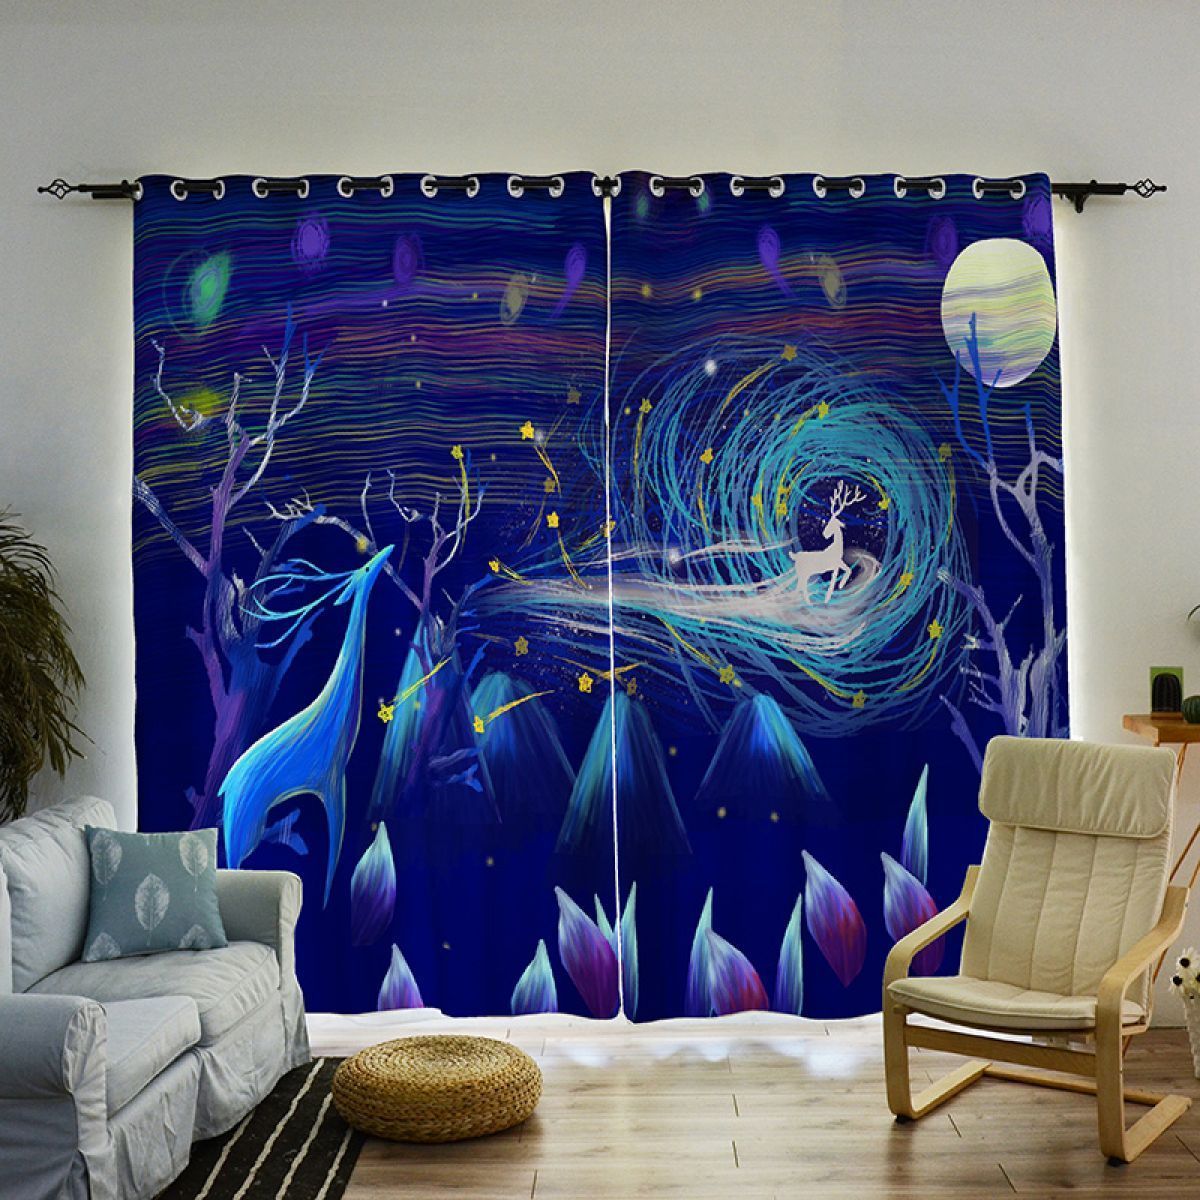 3d Deer In The Forest Art Printed Window Curtain Home Decor